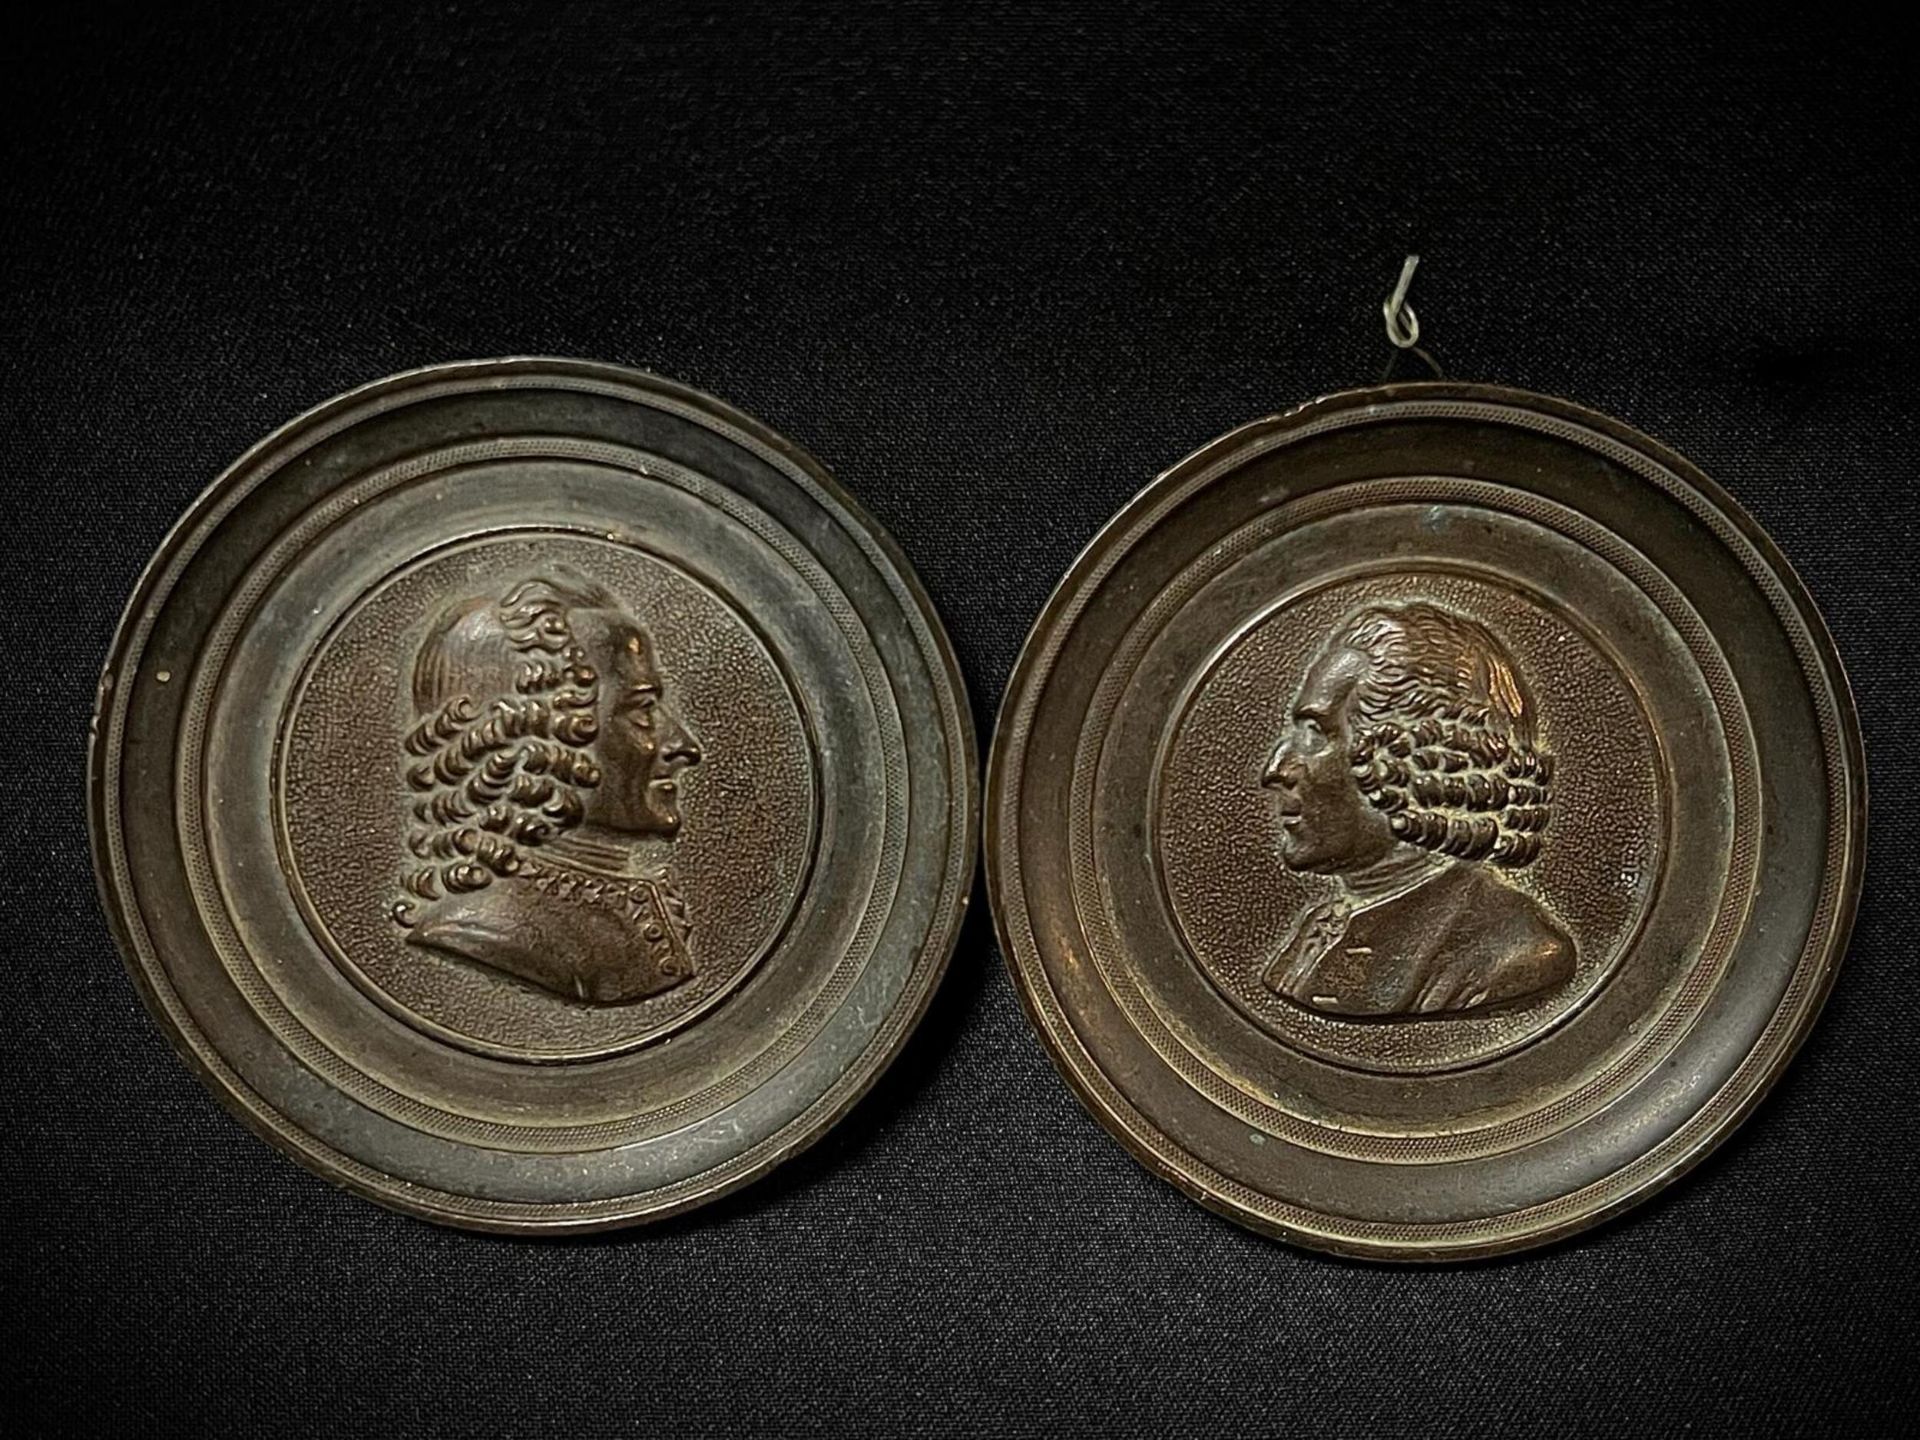 Pair of Elegant Grand Tour 19th century French Bronze Medallions representing Voltaire and Rousseau